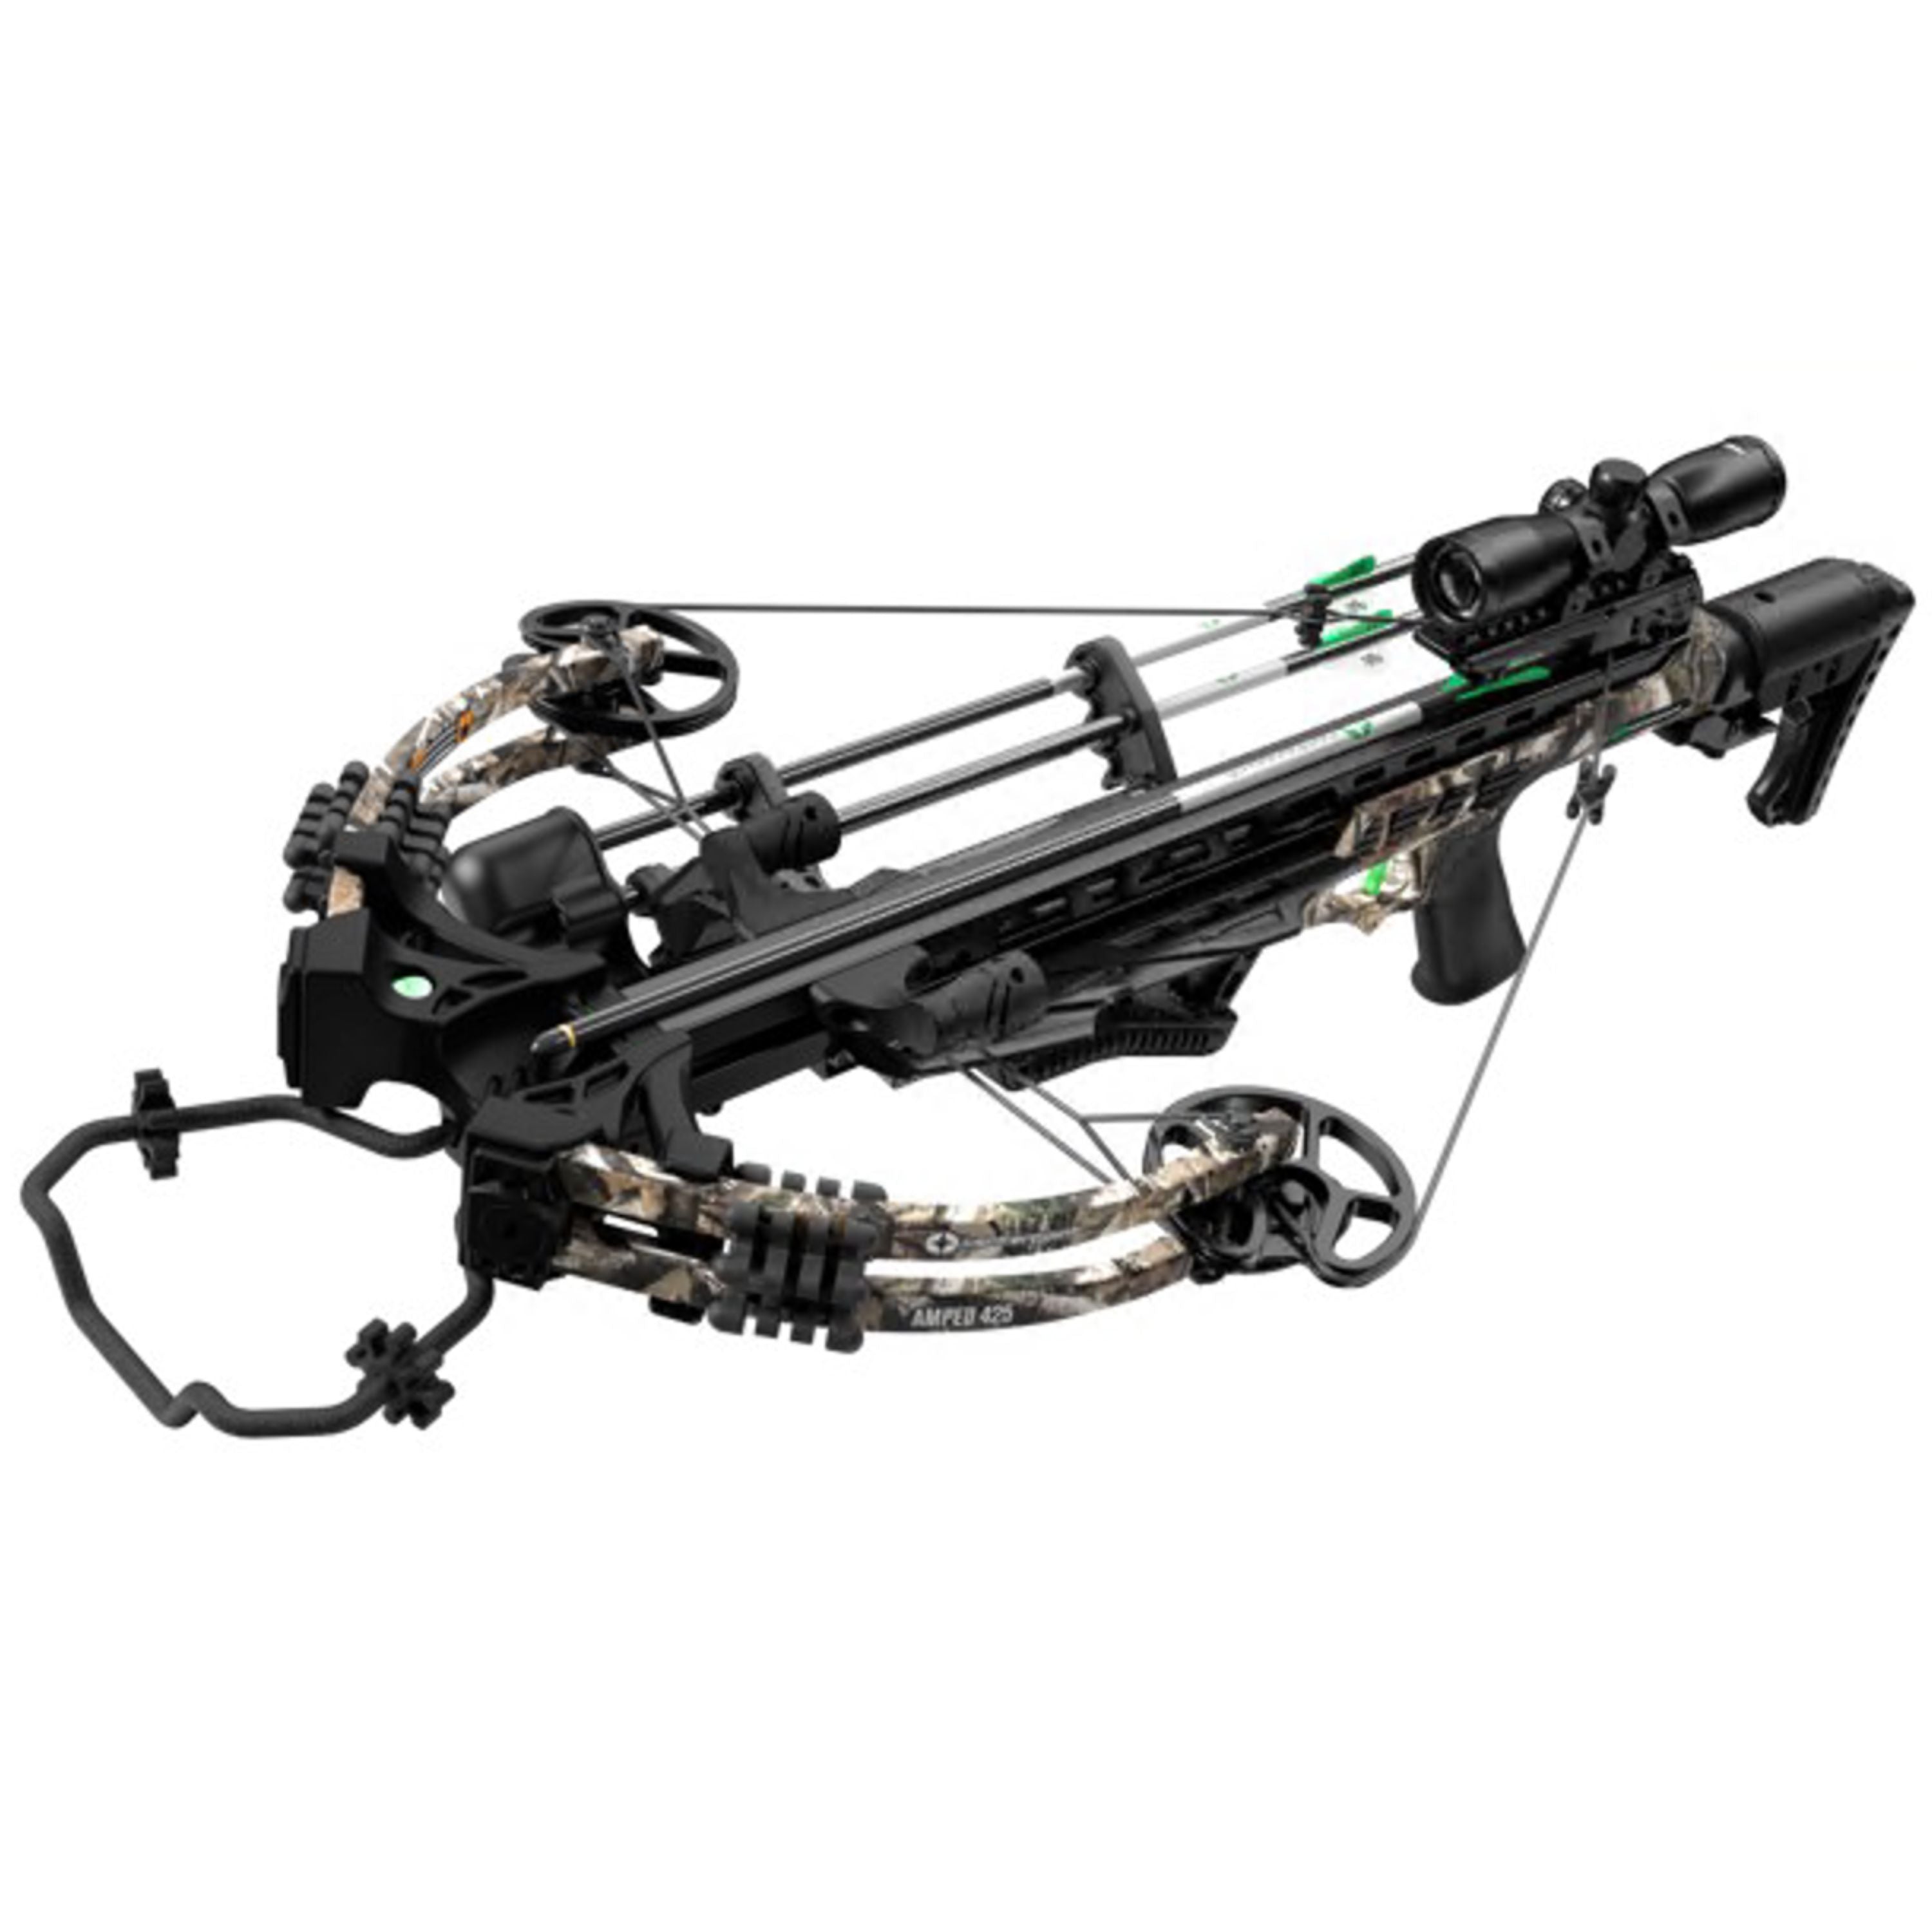 Arbalète "Amped 425" camo||"Amped 425" Camo crossbow